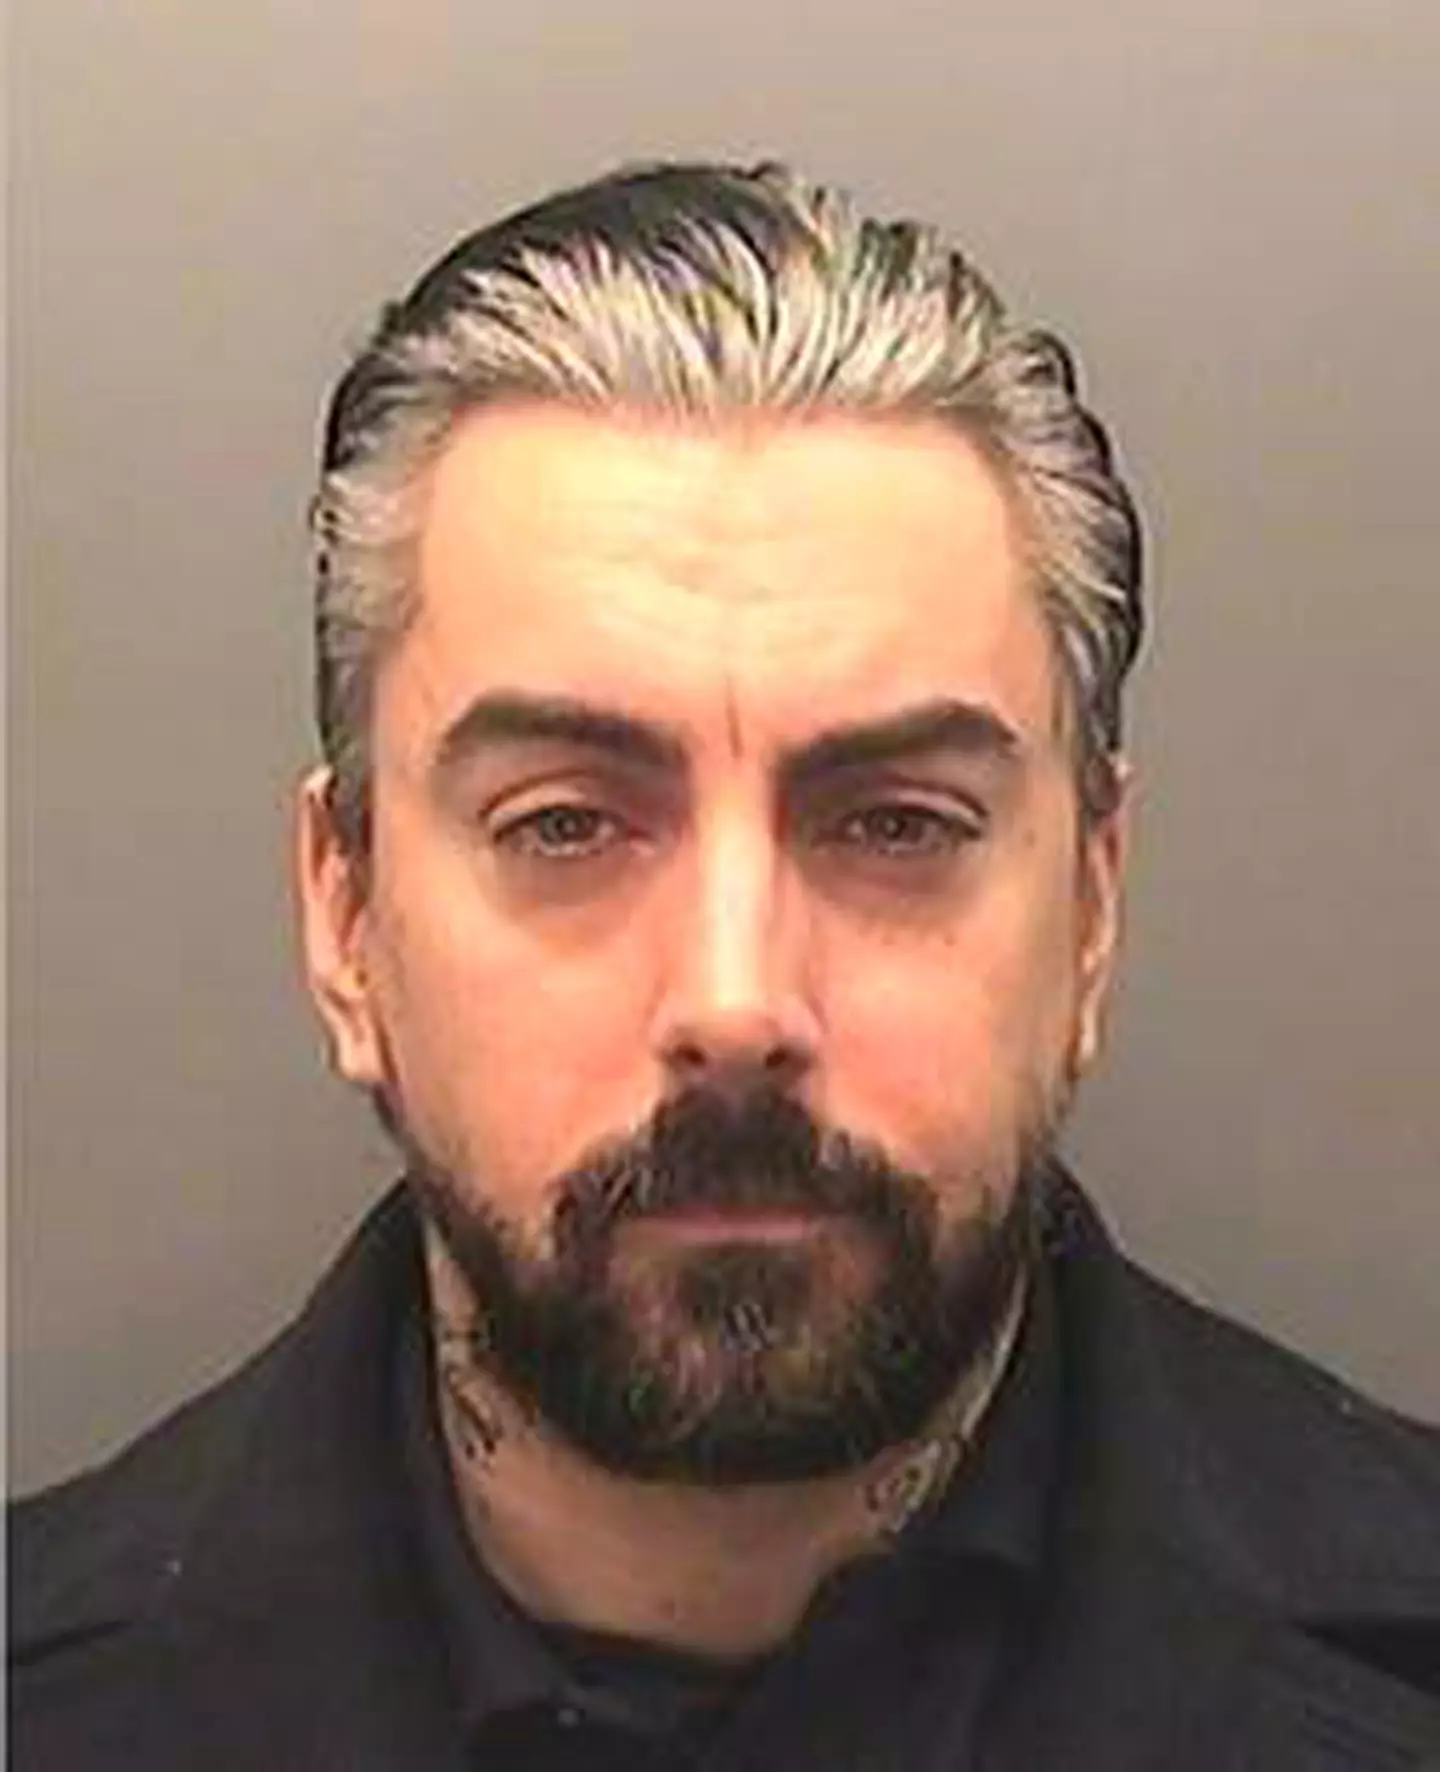 Convicted paedophile Ian Watkins was taken to hospital after being attacked at HMP Wakefield.